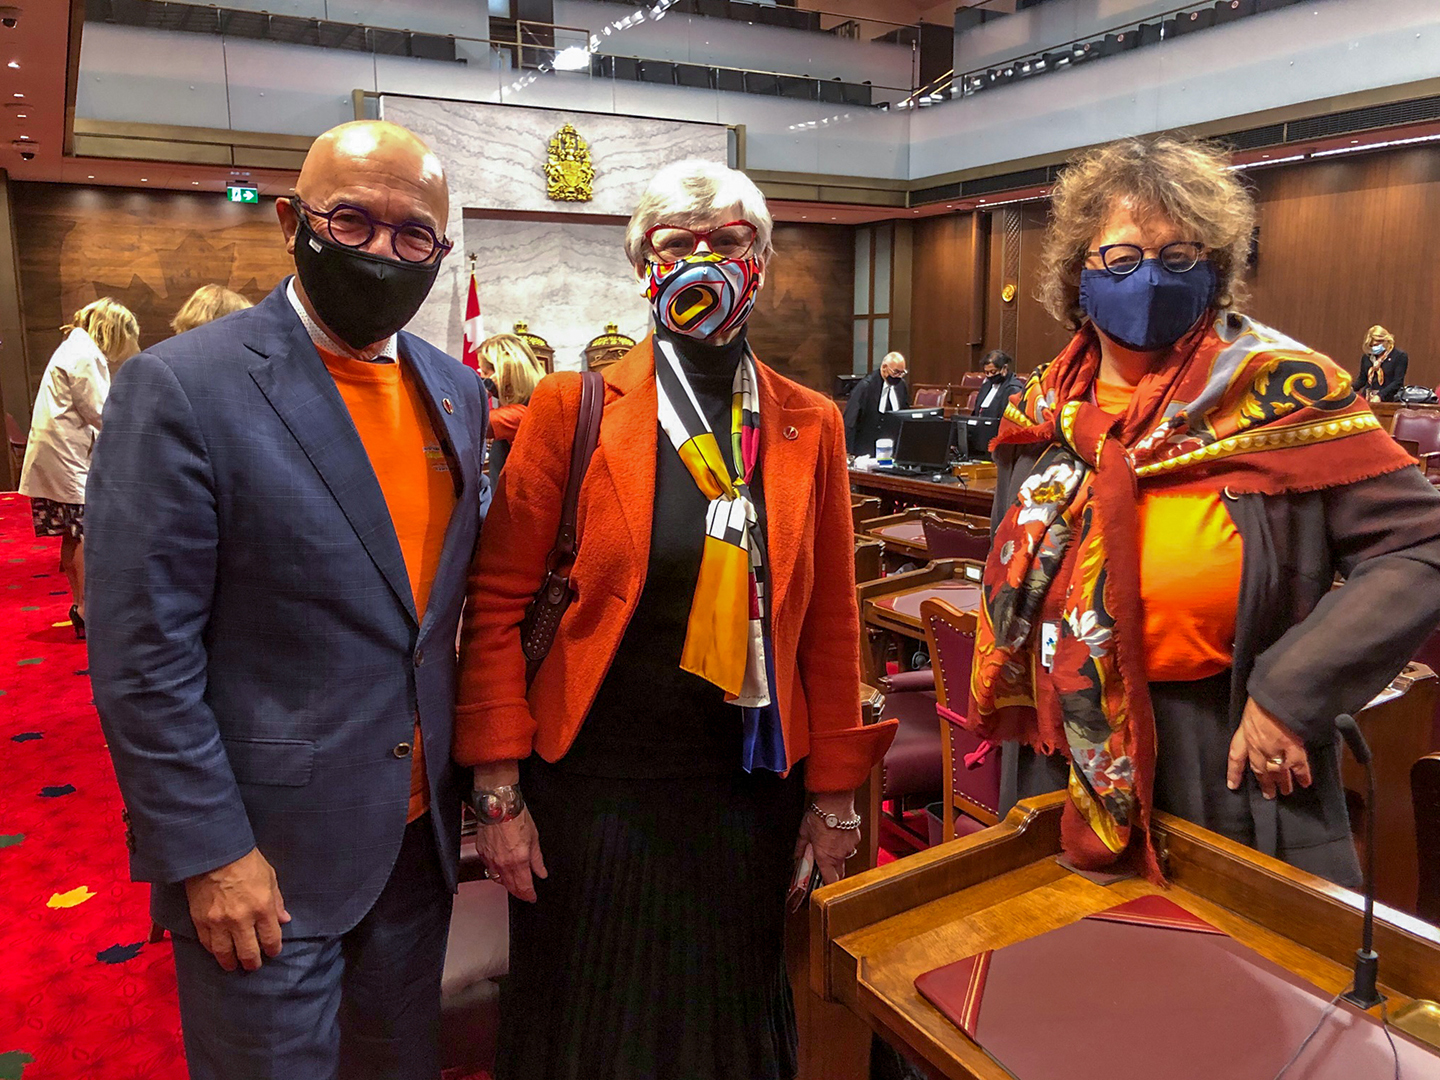 Wednesday, September 30, 2020 — Senators René Cormier, Patricia Bovey and Paula Simons wear orange to mark Orange Shirt Day, which honours the victims and survivors of residential schools.